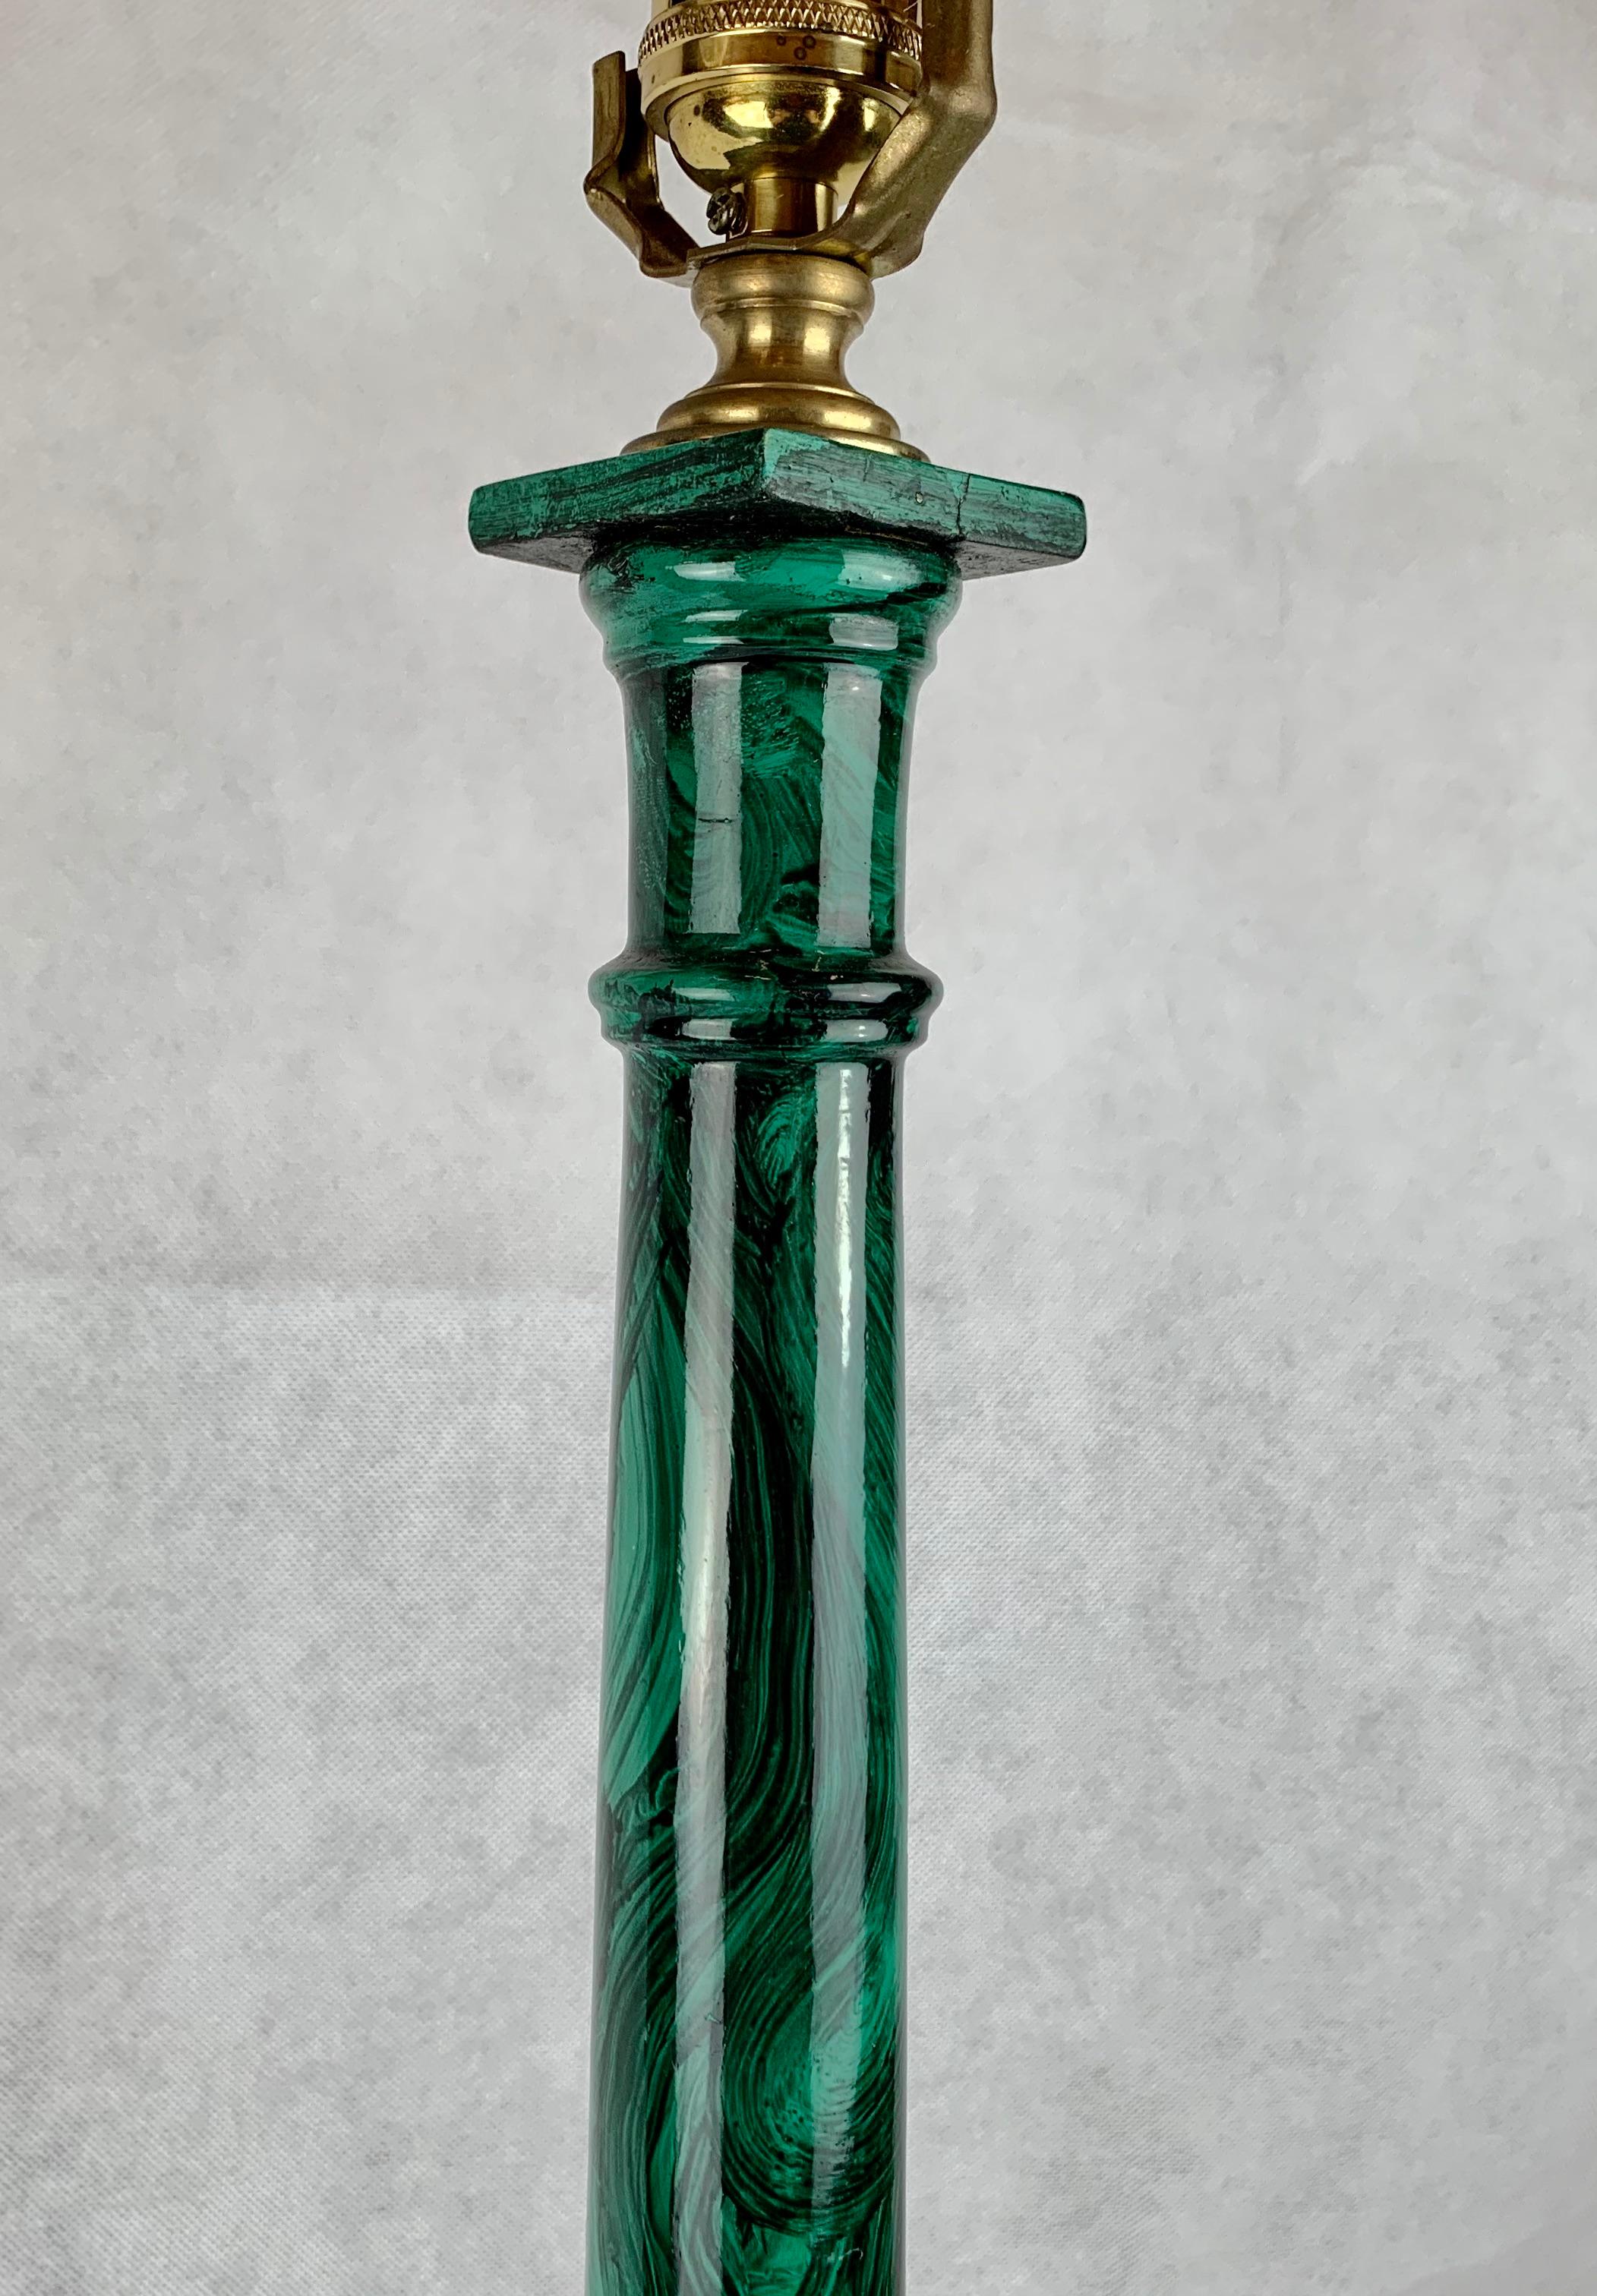 Handsome neoclassical style table lamp hand faux painted wood to resemble malachite. The base is marble.
Measures: H- 32.75